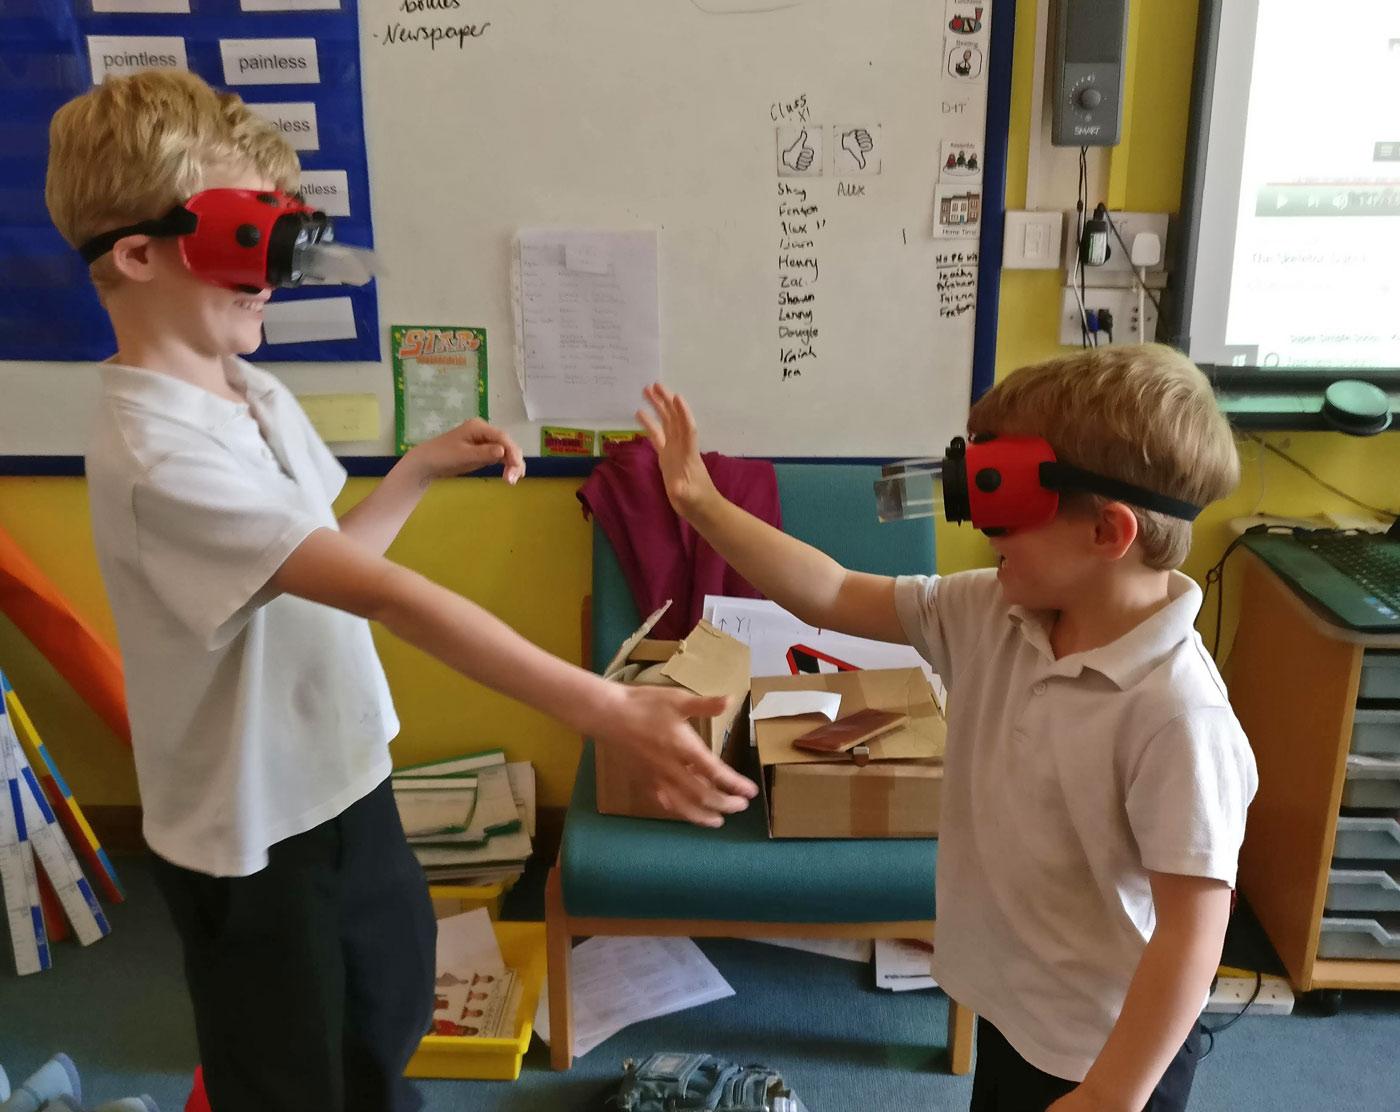 Shaking hands is tricky when you're wearing reversing goggles.